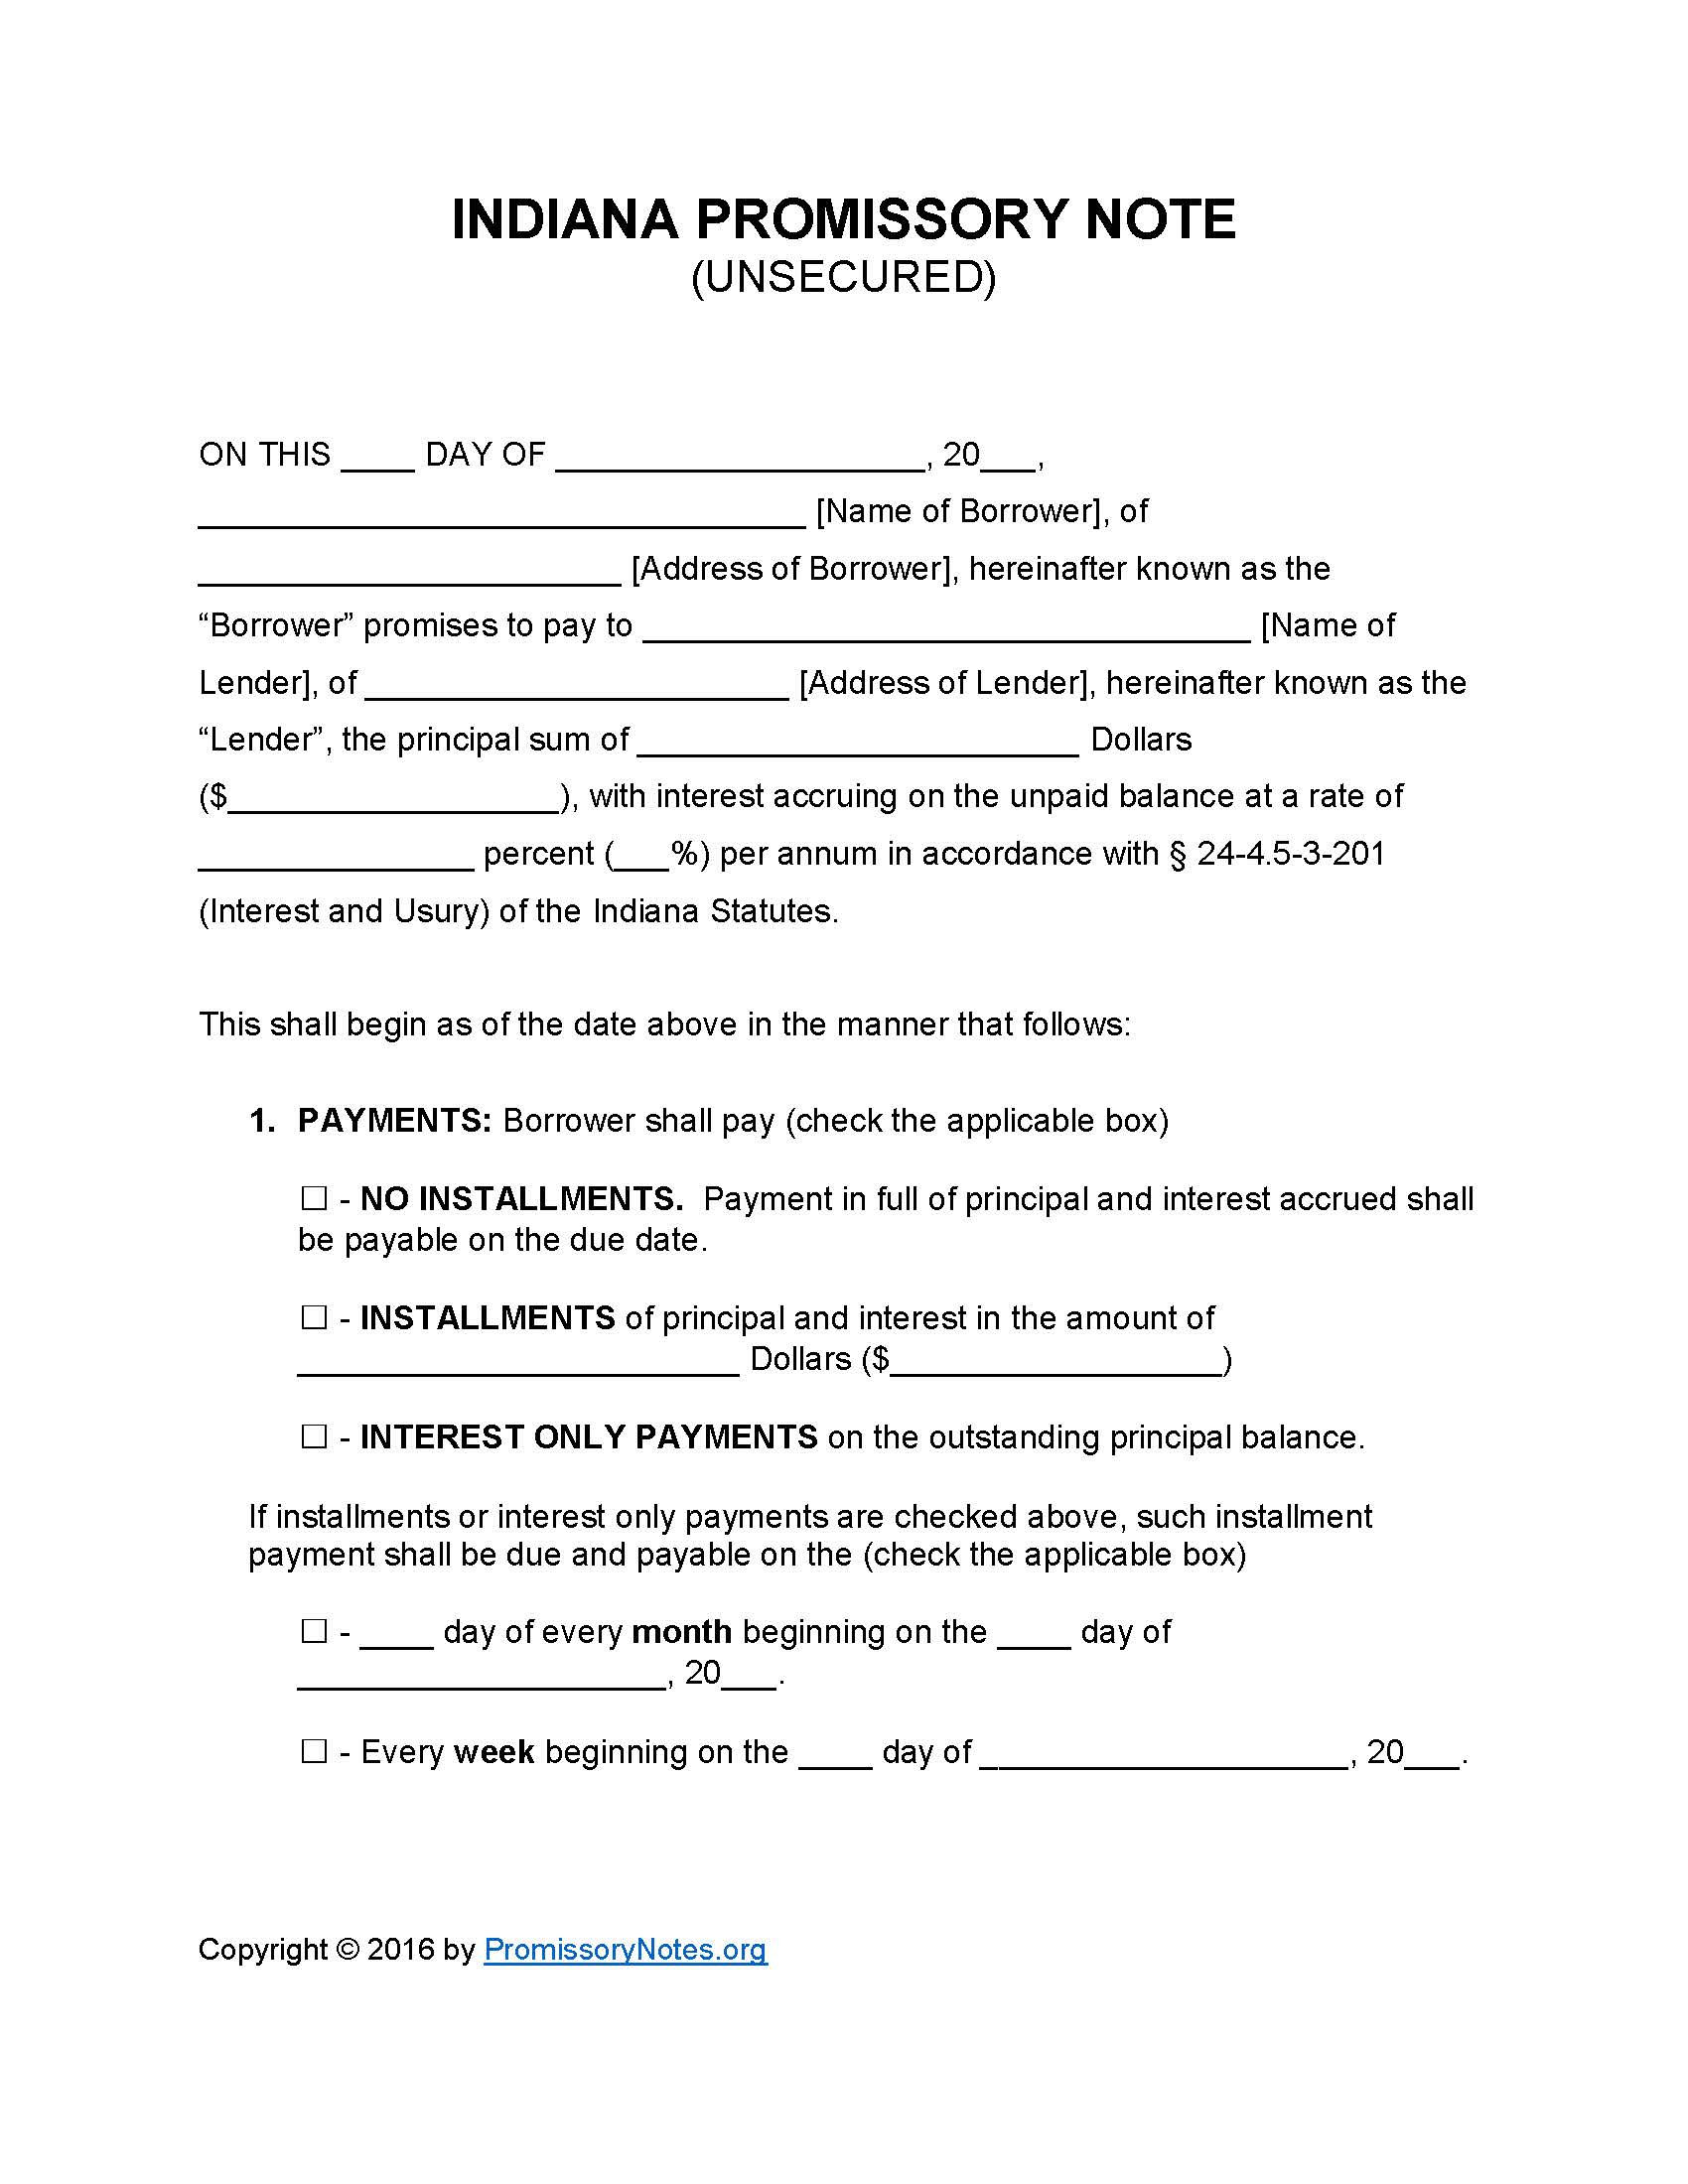 indiana-unsecured-promissory-note-form